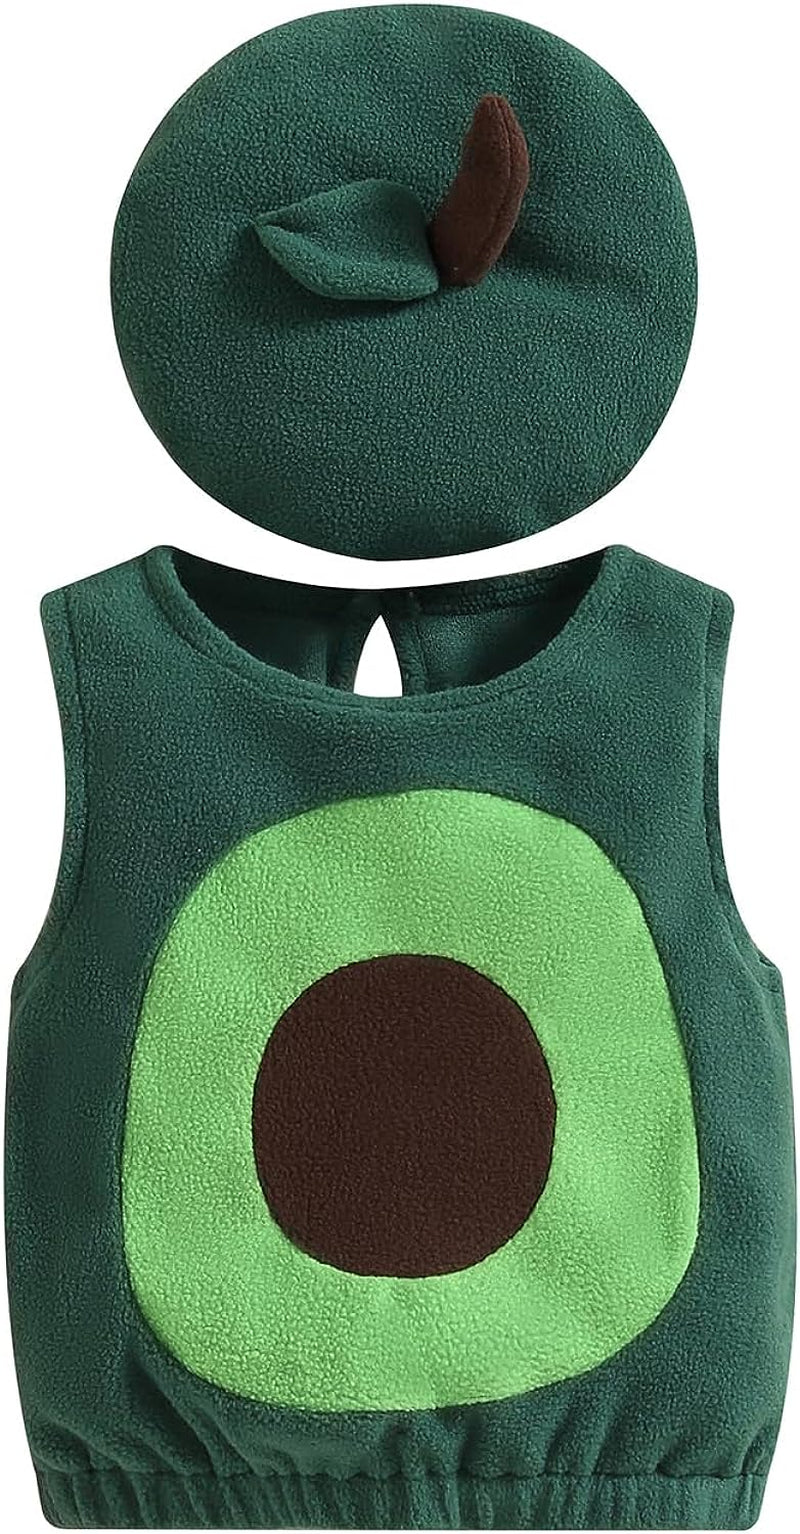 Madjtlqy Halloween Costumes Baby Girl Boy Avocado Sleeveless Romper Jumpsuit + Hat 2Pcs Outfit  Madjtlqy Avocado 0-6 Months 